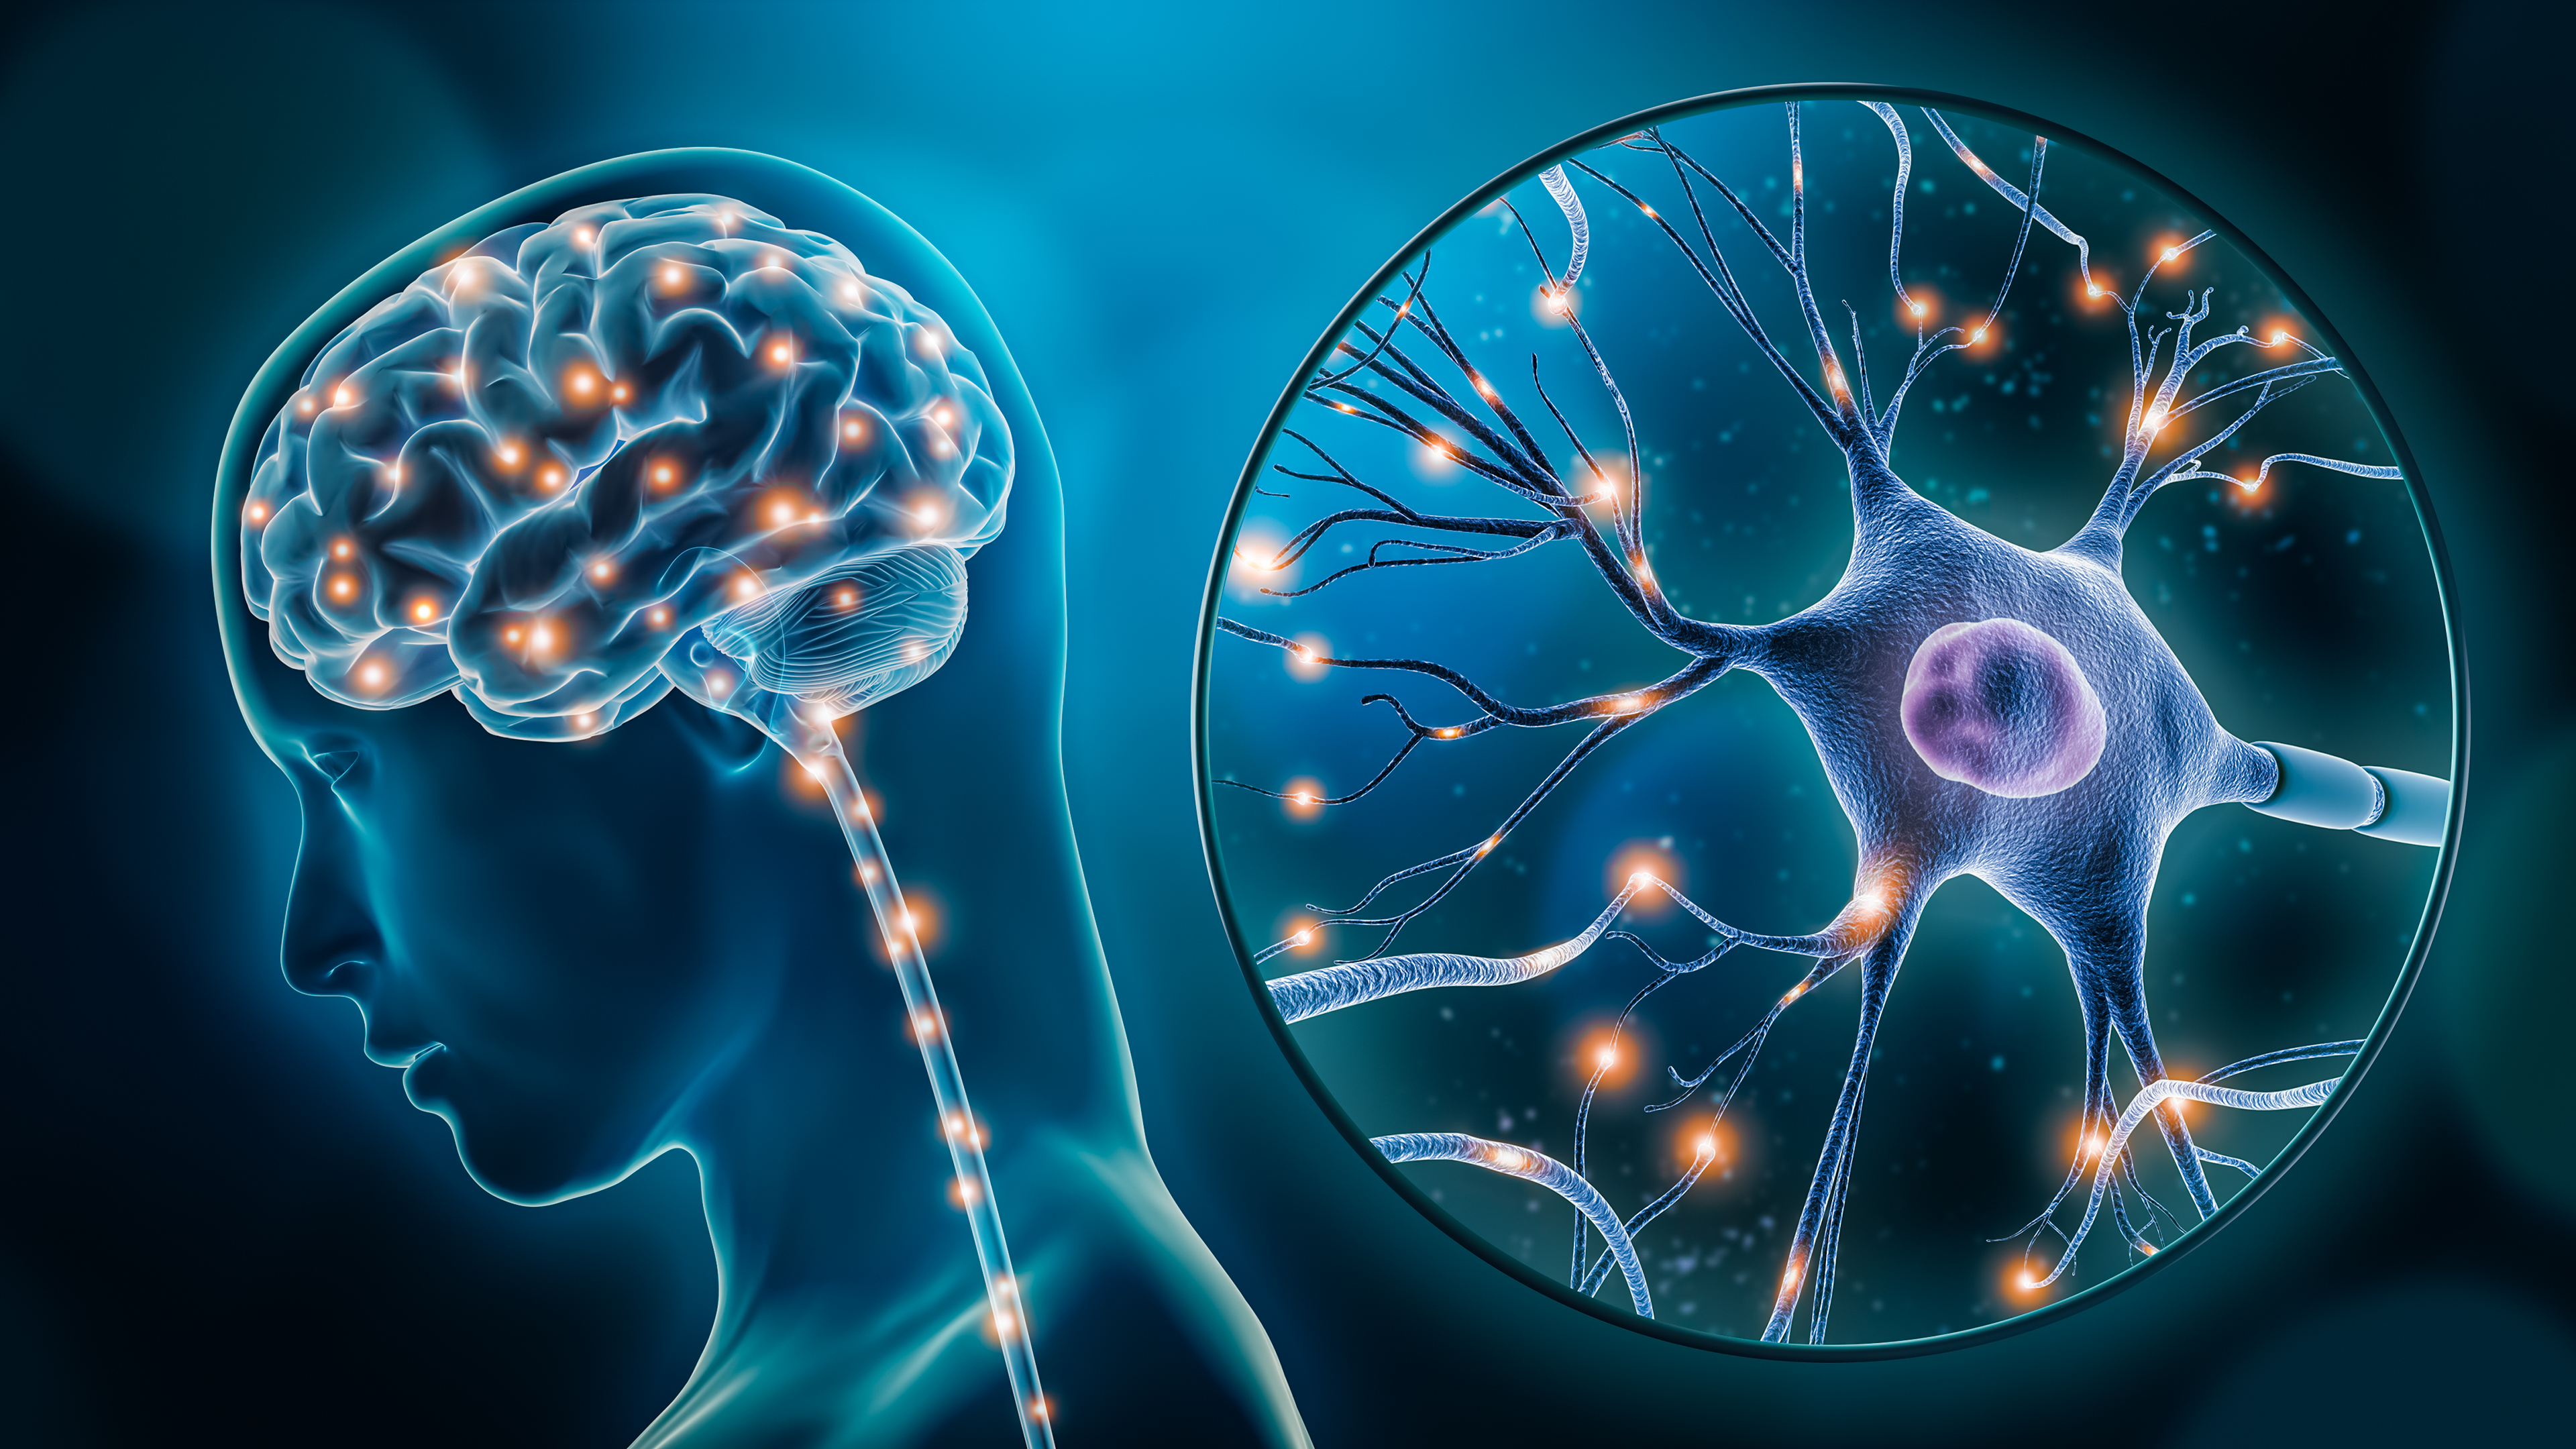 Illustration shows brain inside human head and closeup of neuron with connections and sparks moving along them.